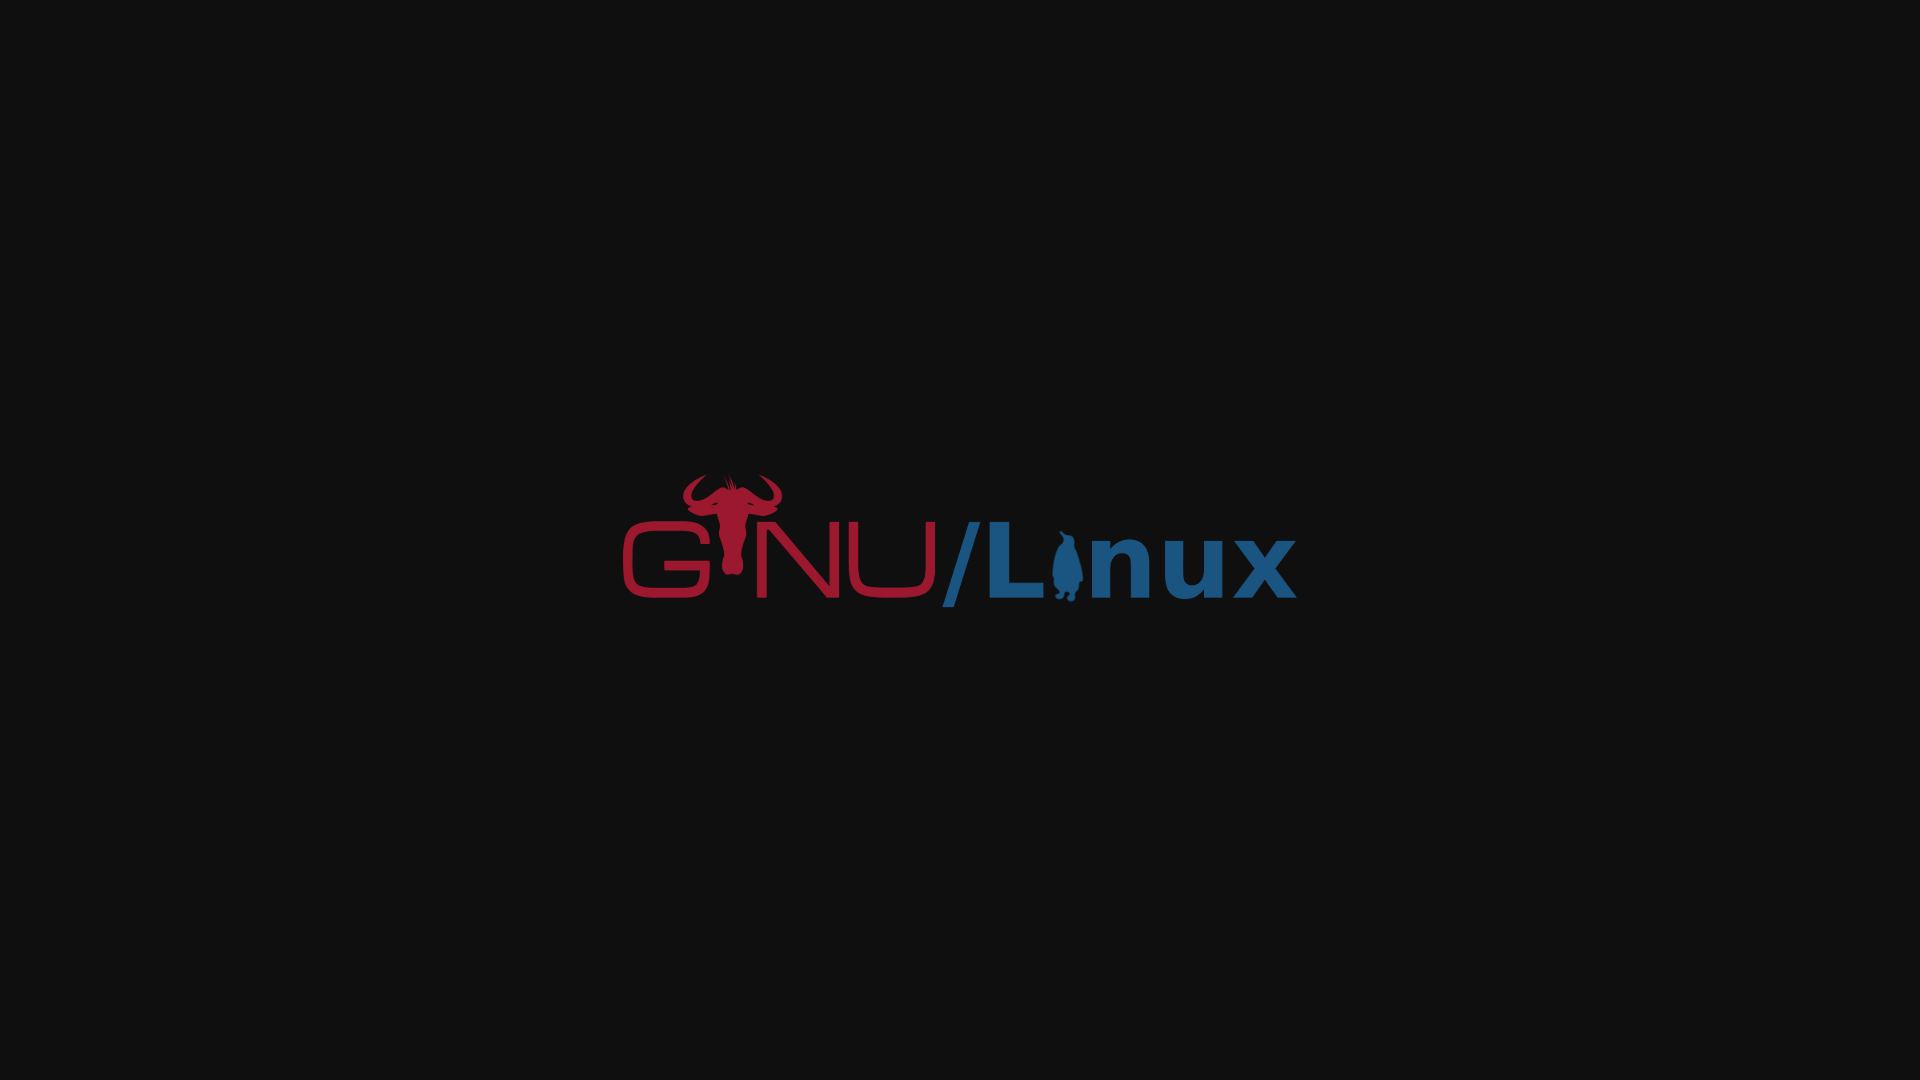 Simple Background Typography Blue Linux Red Gnu